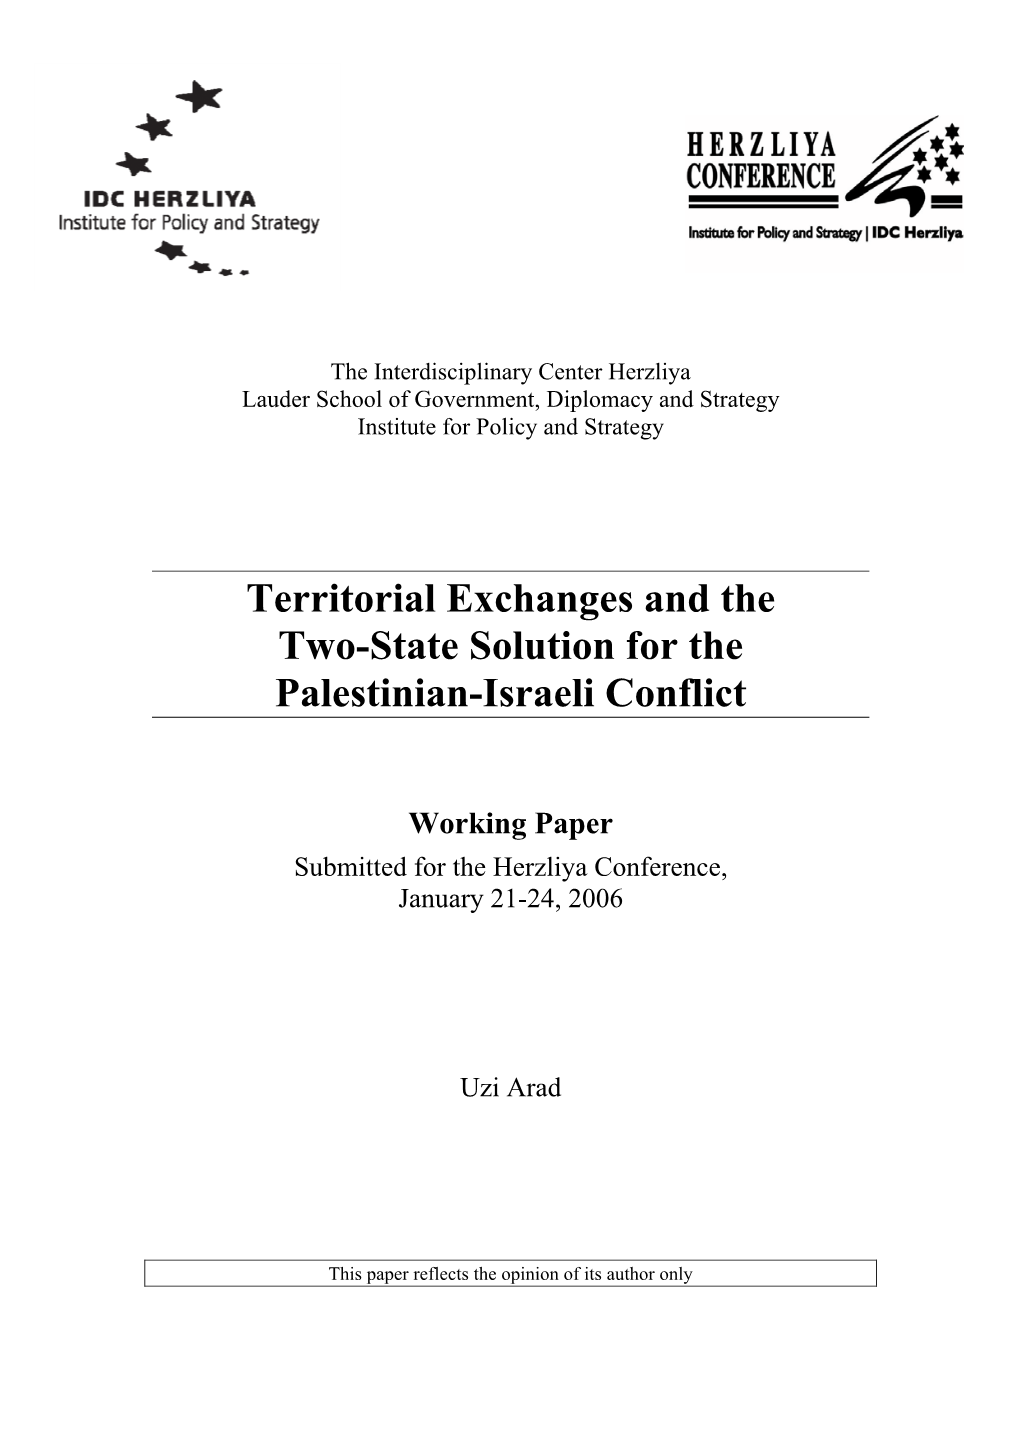 Territorial Exchanges and the Two-State Solution for the Palestinian-Israeli Conflict